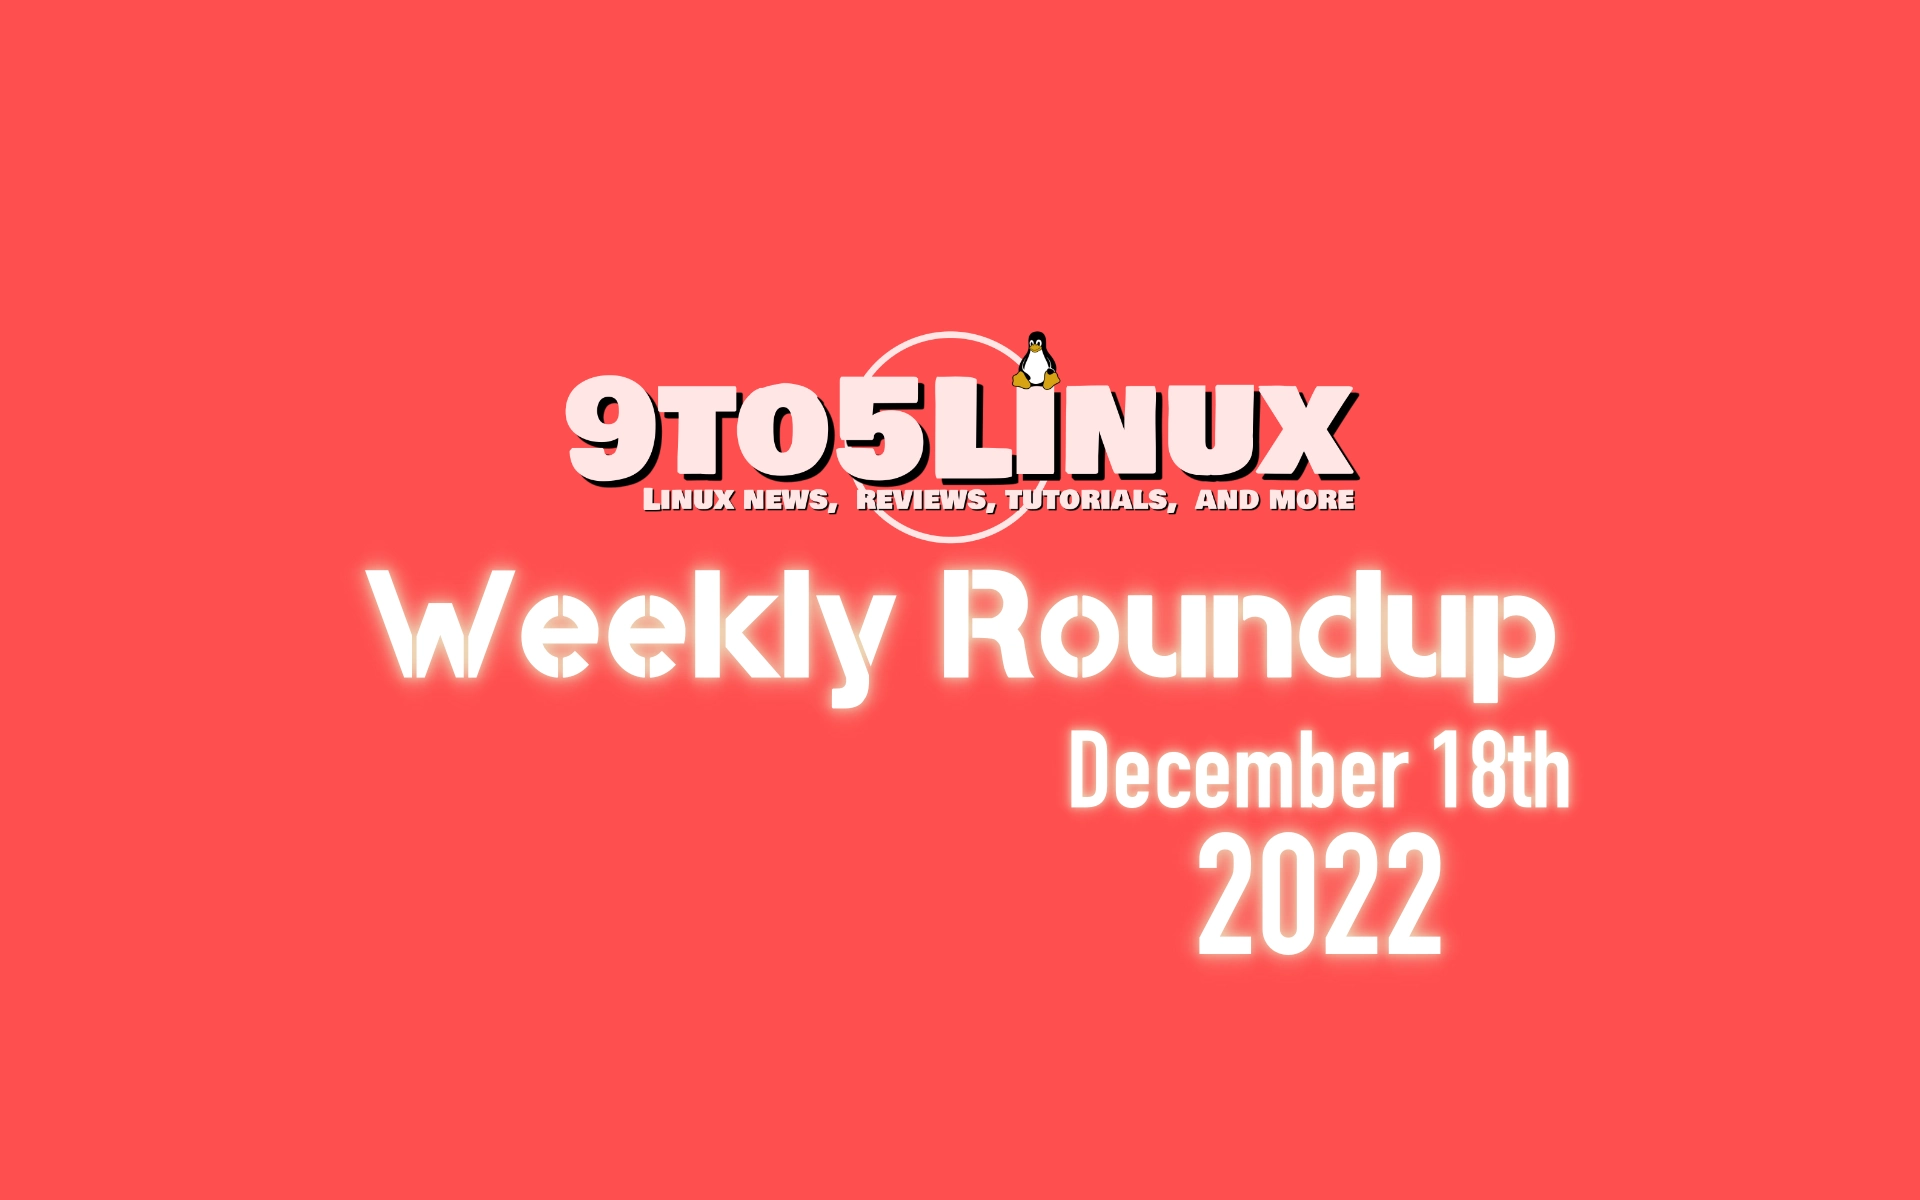 9to5Linux Weekly Roundup: December 18th, 2022